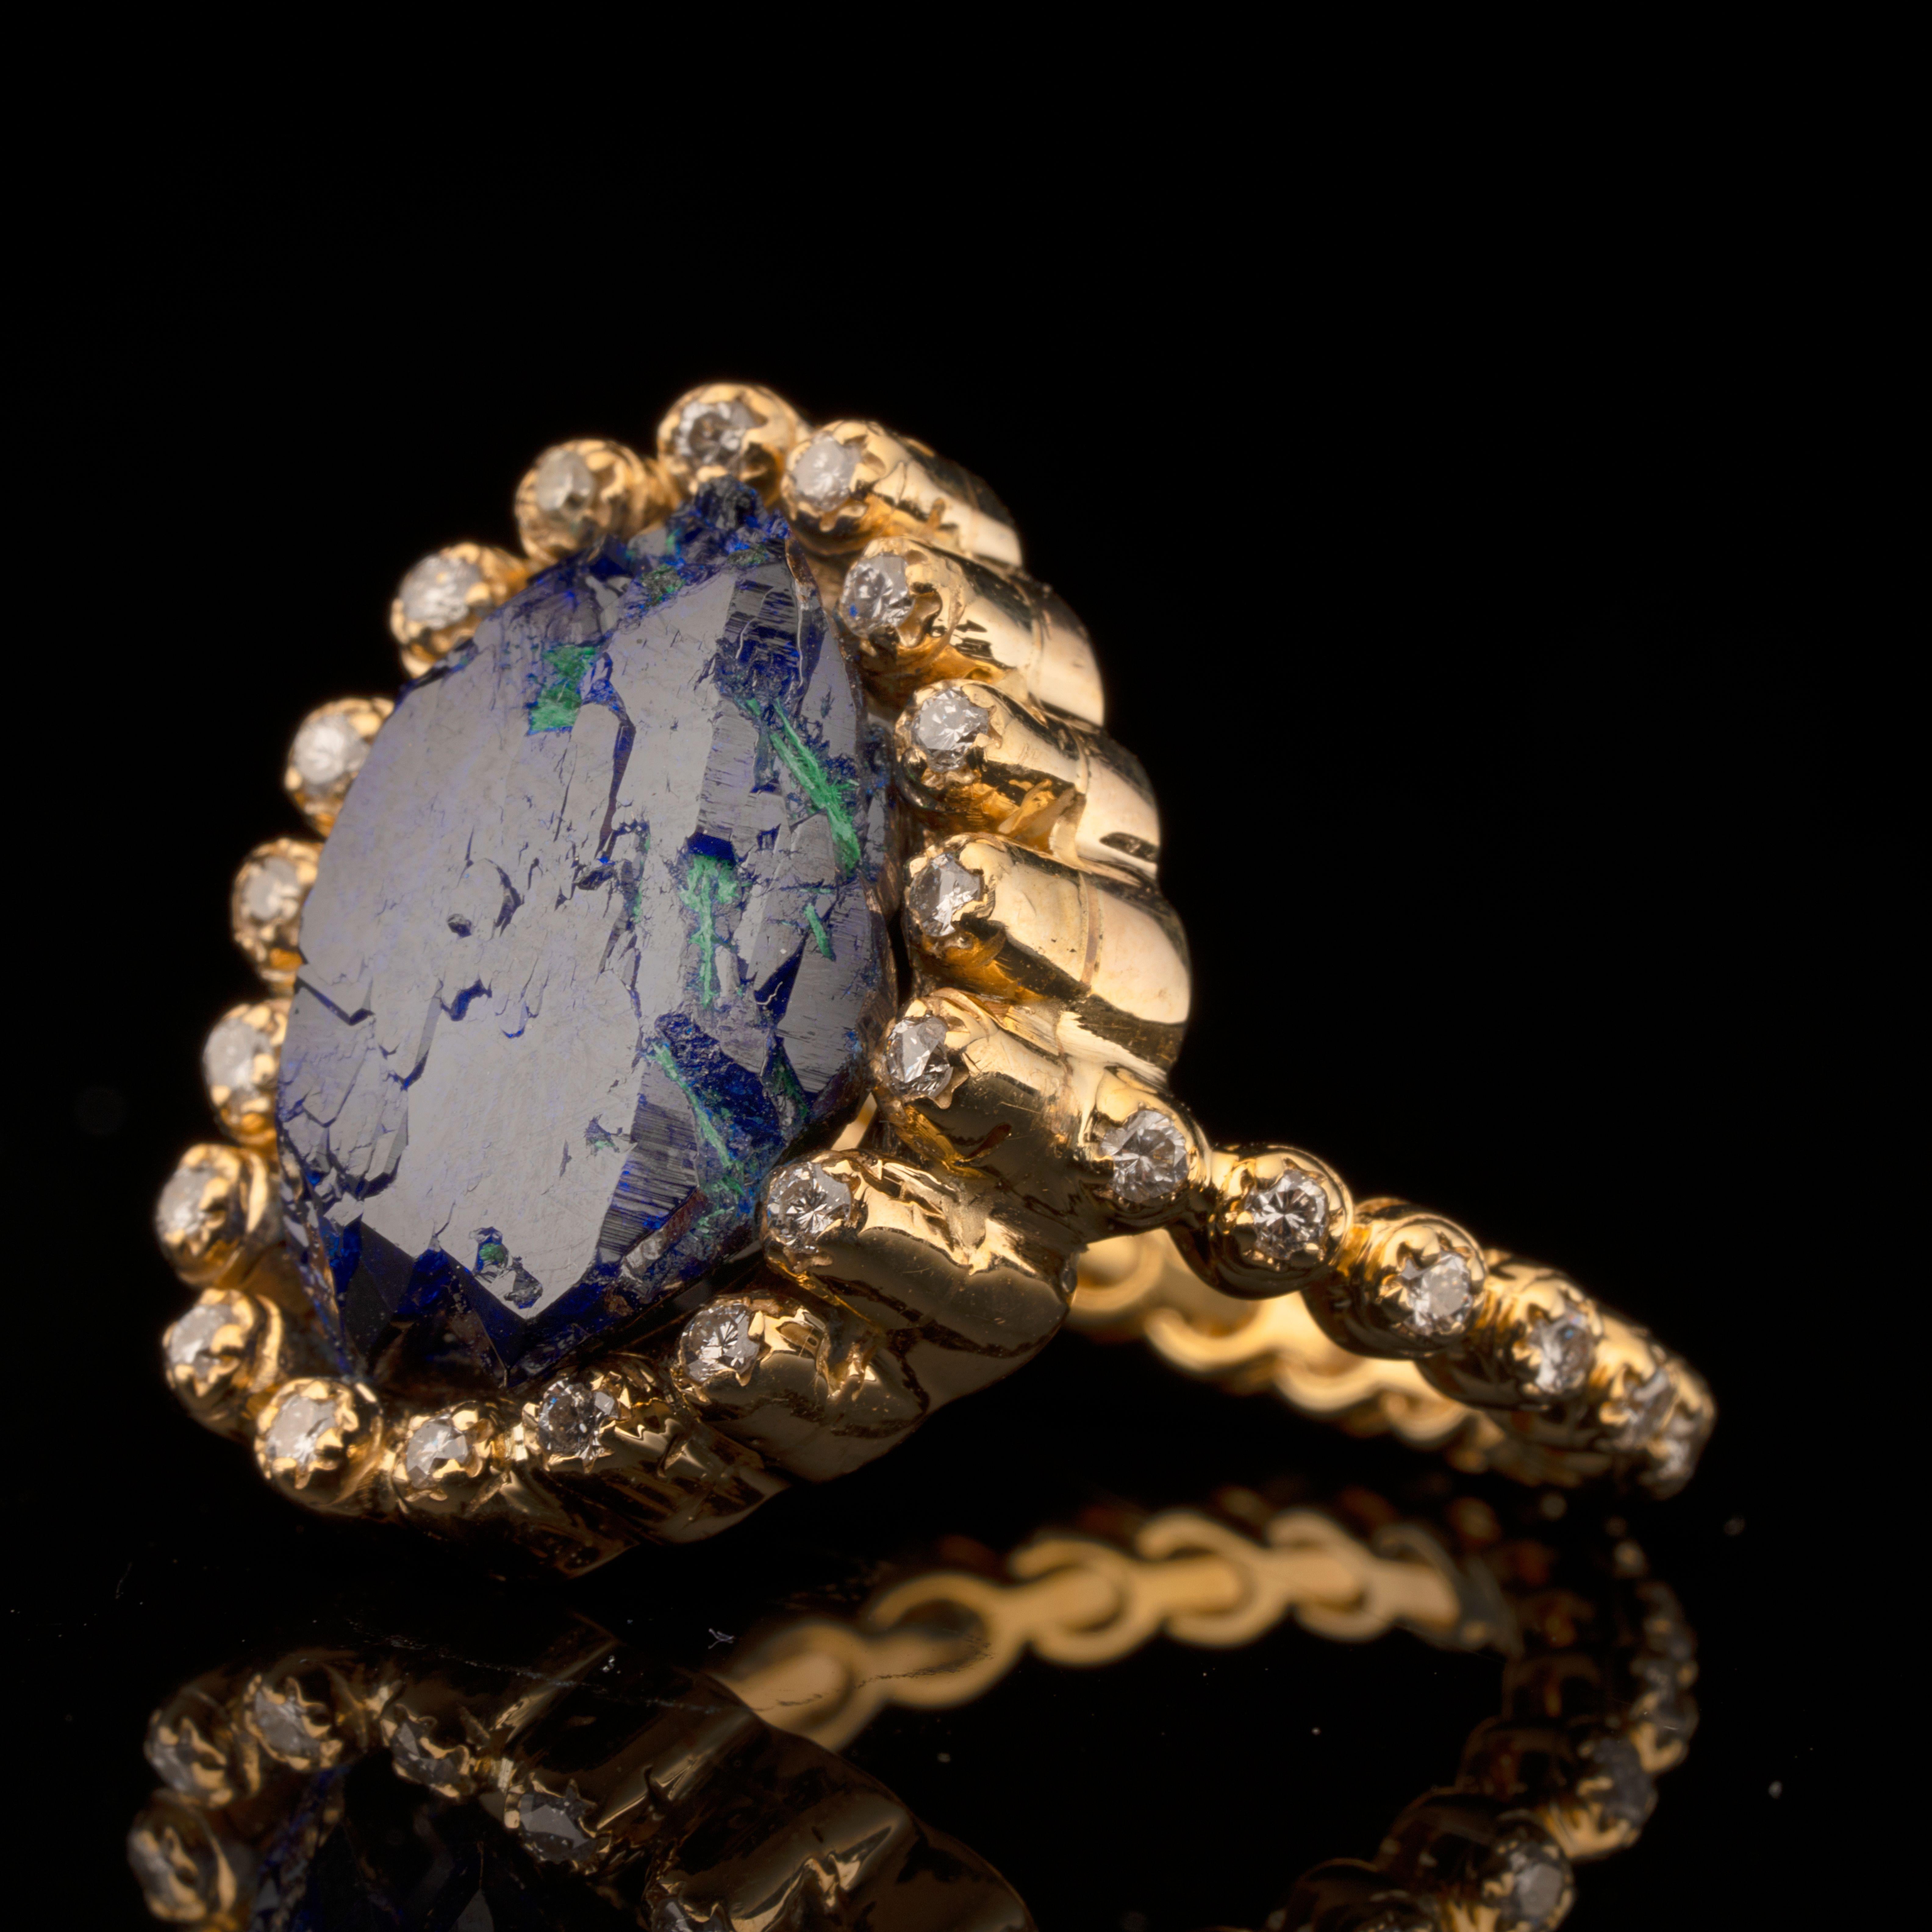 This stunning custom one of a kind ring showcases a sizable raw azurite with accents of vivid malachite in a scalloped 14 karat gold setting lined in 38 round cut diamonds around both the band and center stone for a total of approximately 0.40